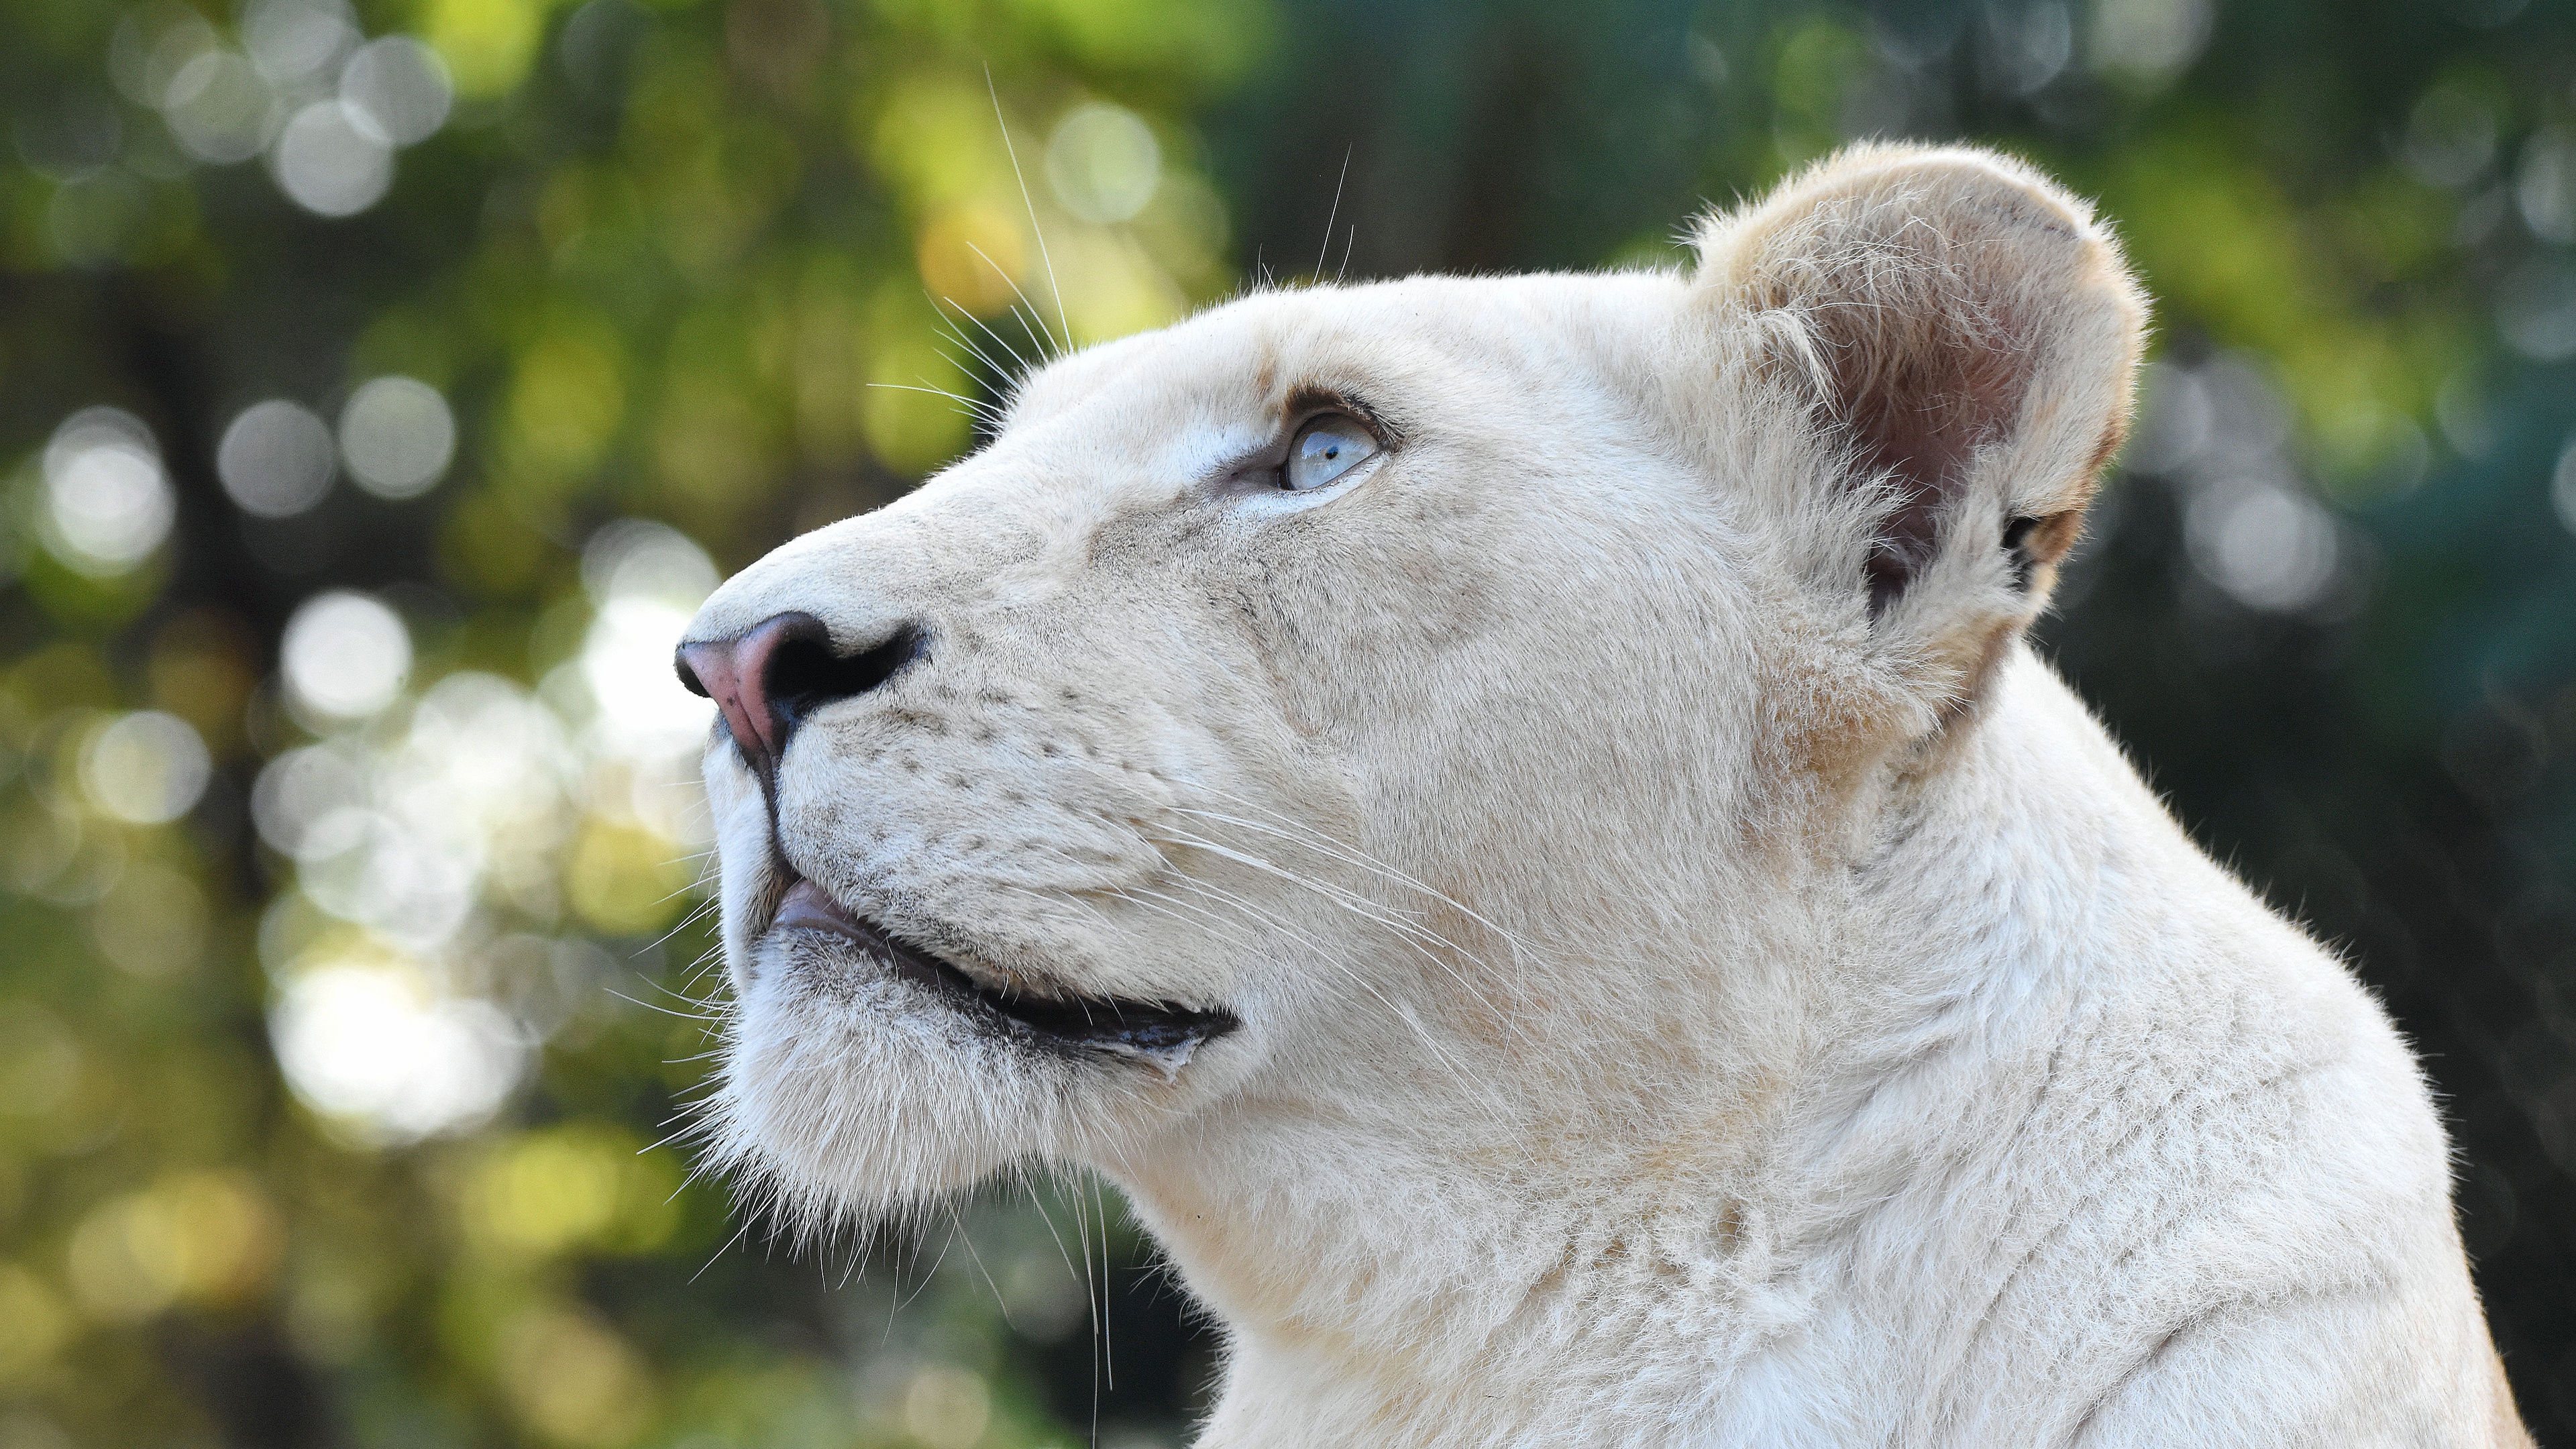 White Lion Wallpaper APK 26 for Android  Download White Lion Wallpaper  APK Latest Version from APKFabcom